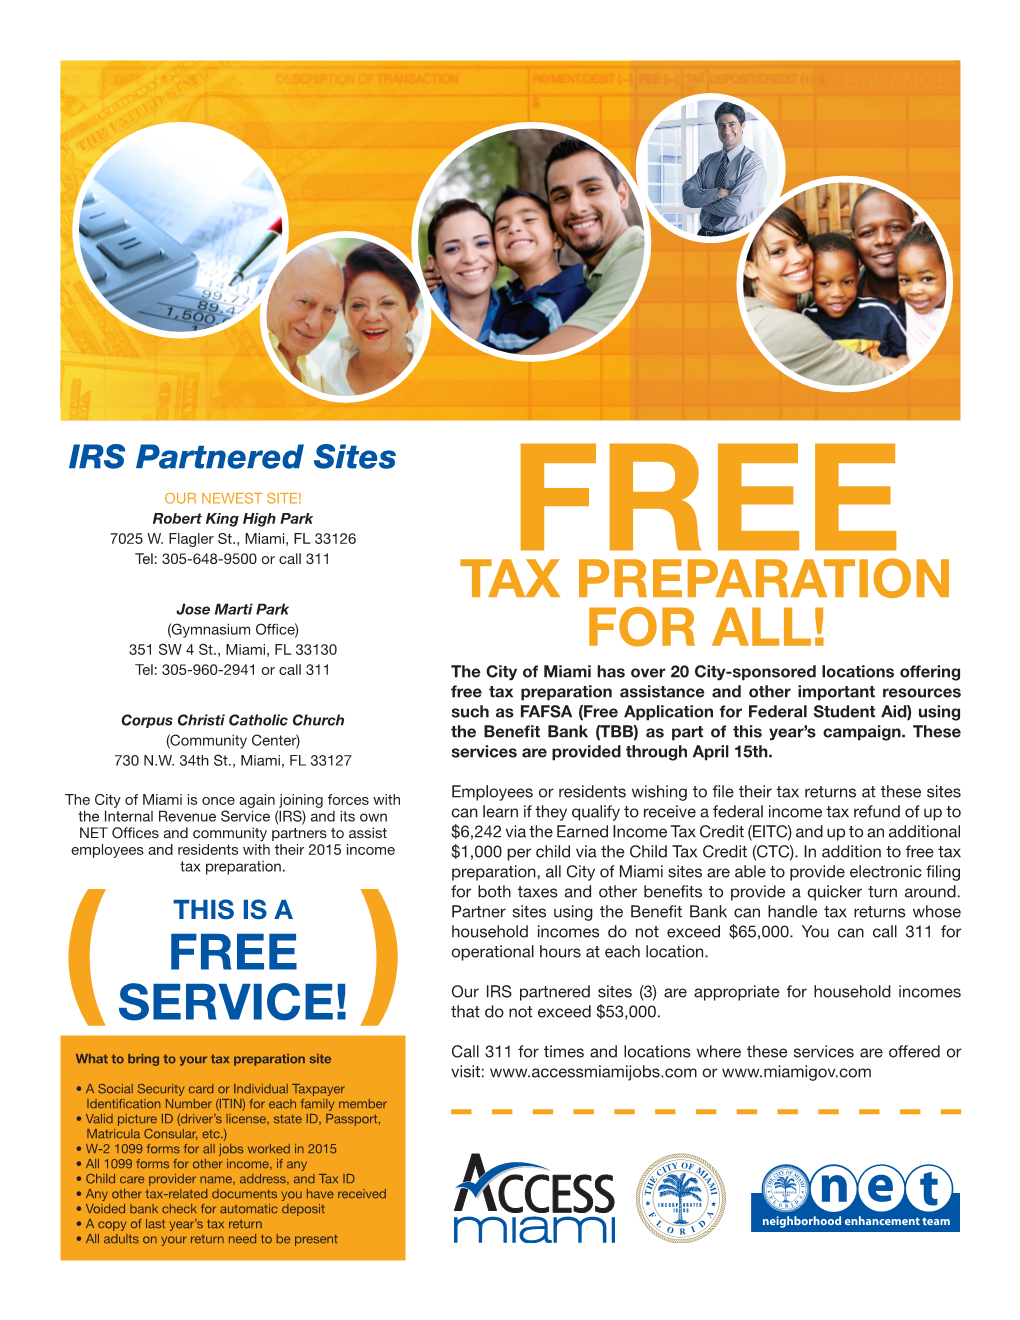 Tax Preparation for All!